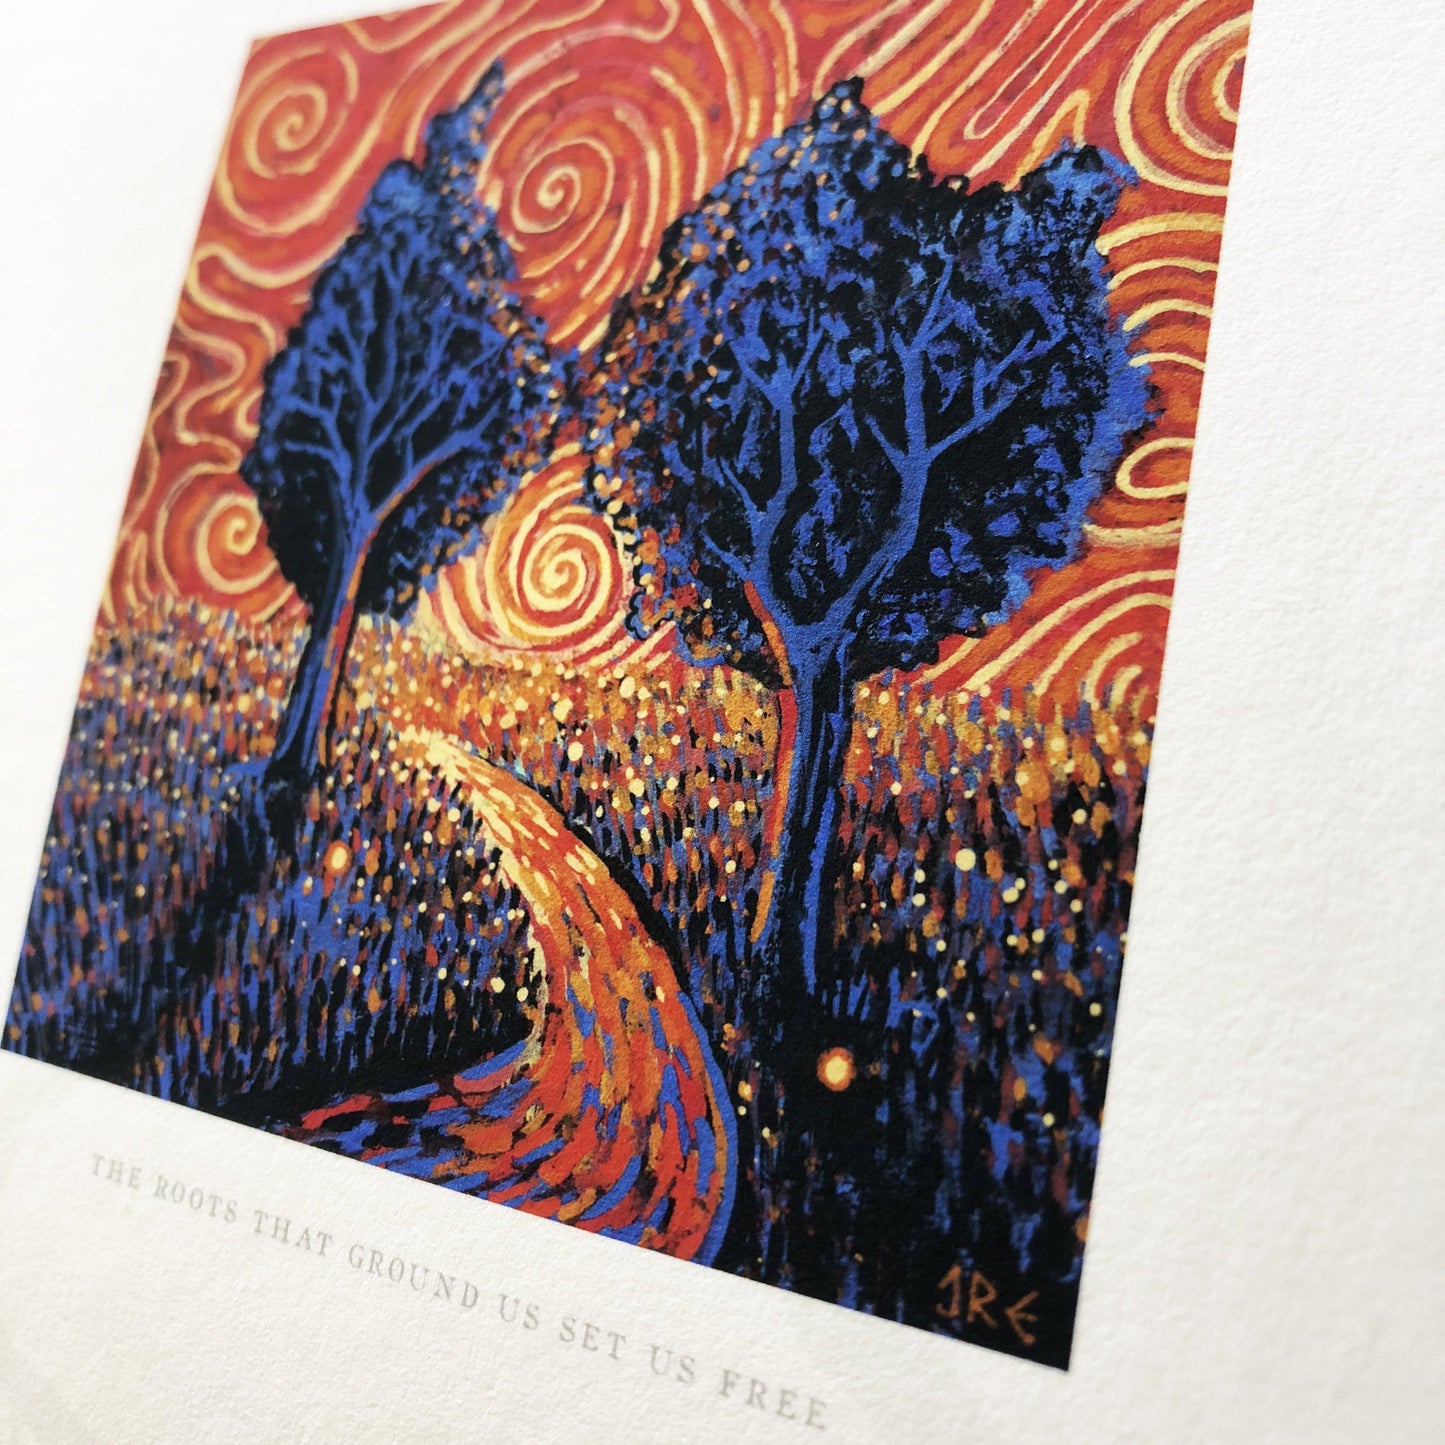 The Roots That Ground Us (AP Edition of 20) Print James R. Eads